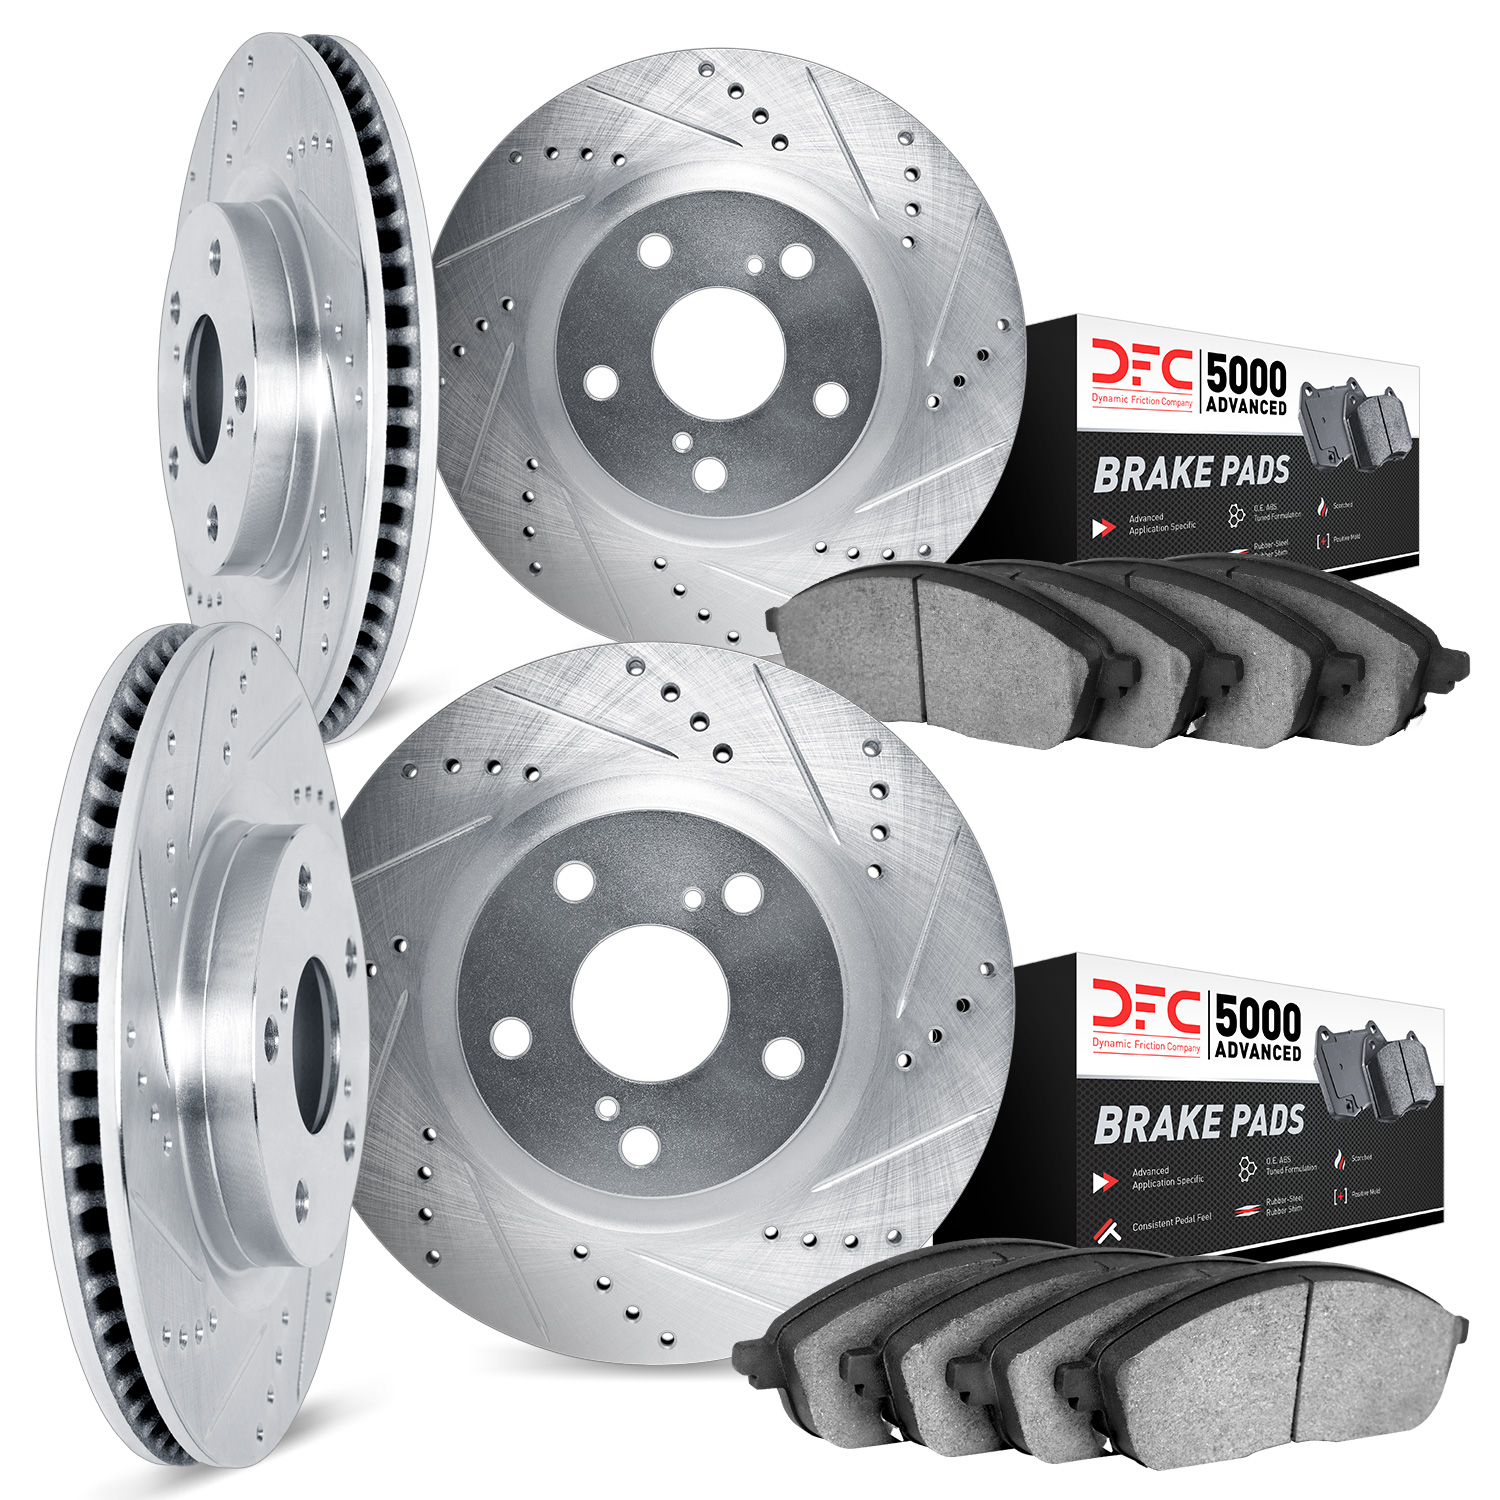 7504-54280 Drilled/Slotted Brake Rotors w/5000 Advanced Brake Pads Kit [Silver], 2005-2014 Ford/Lincoln/Mercury/Mazda, Position: